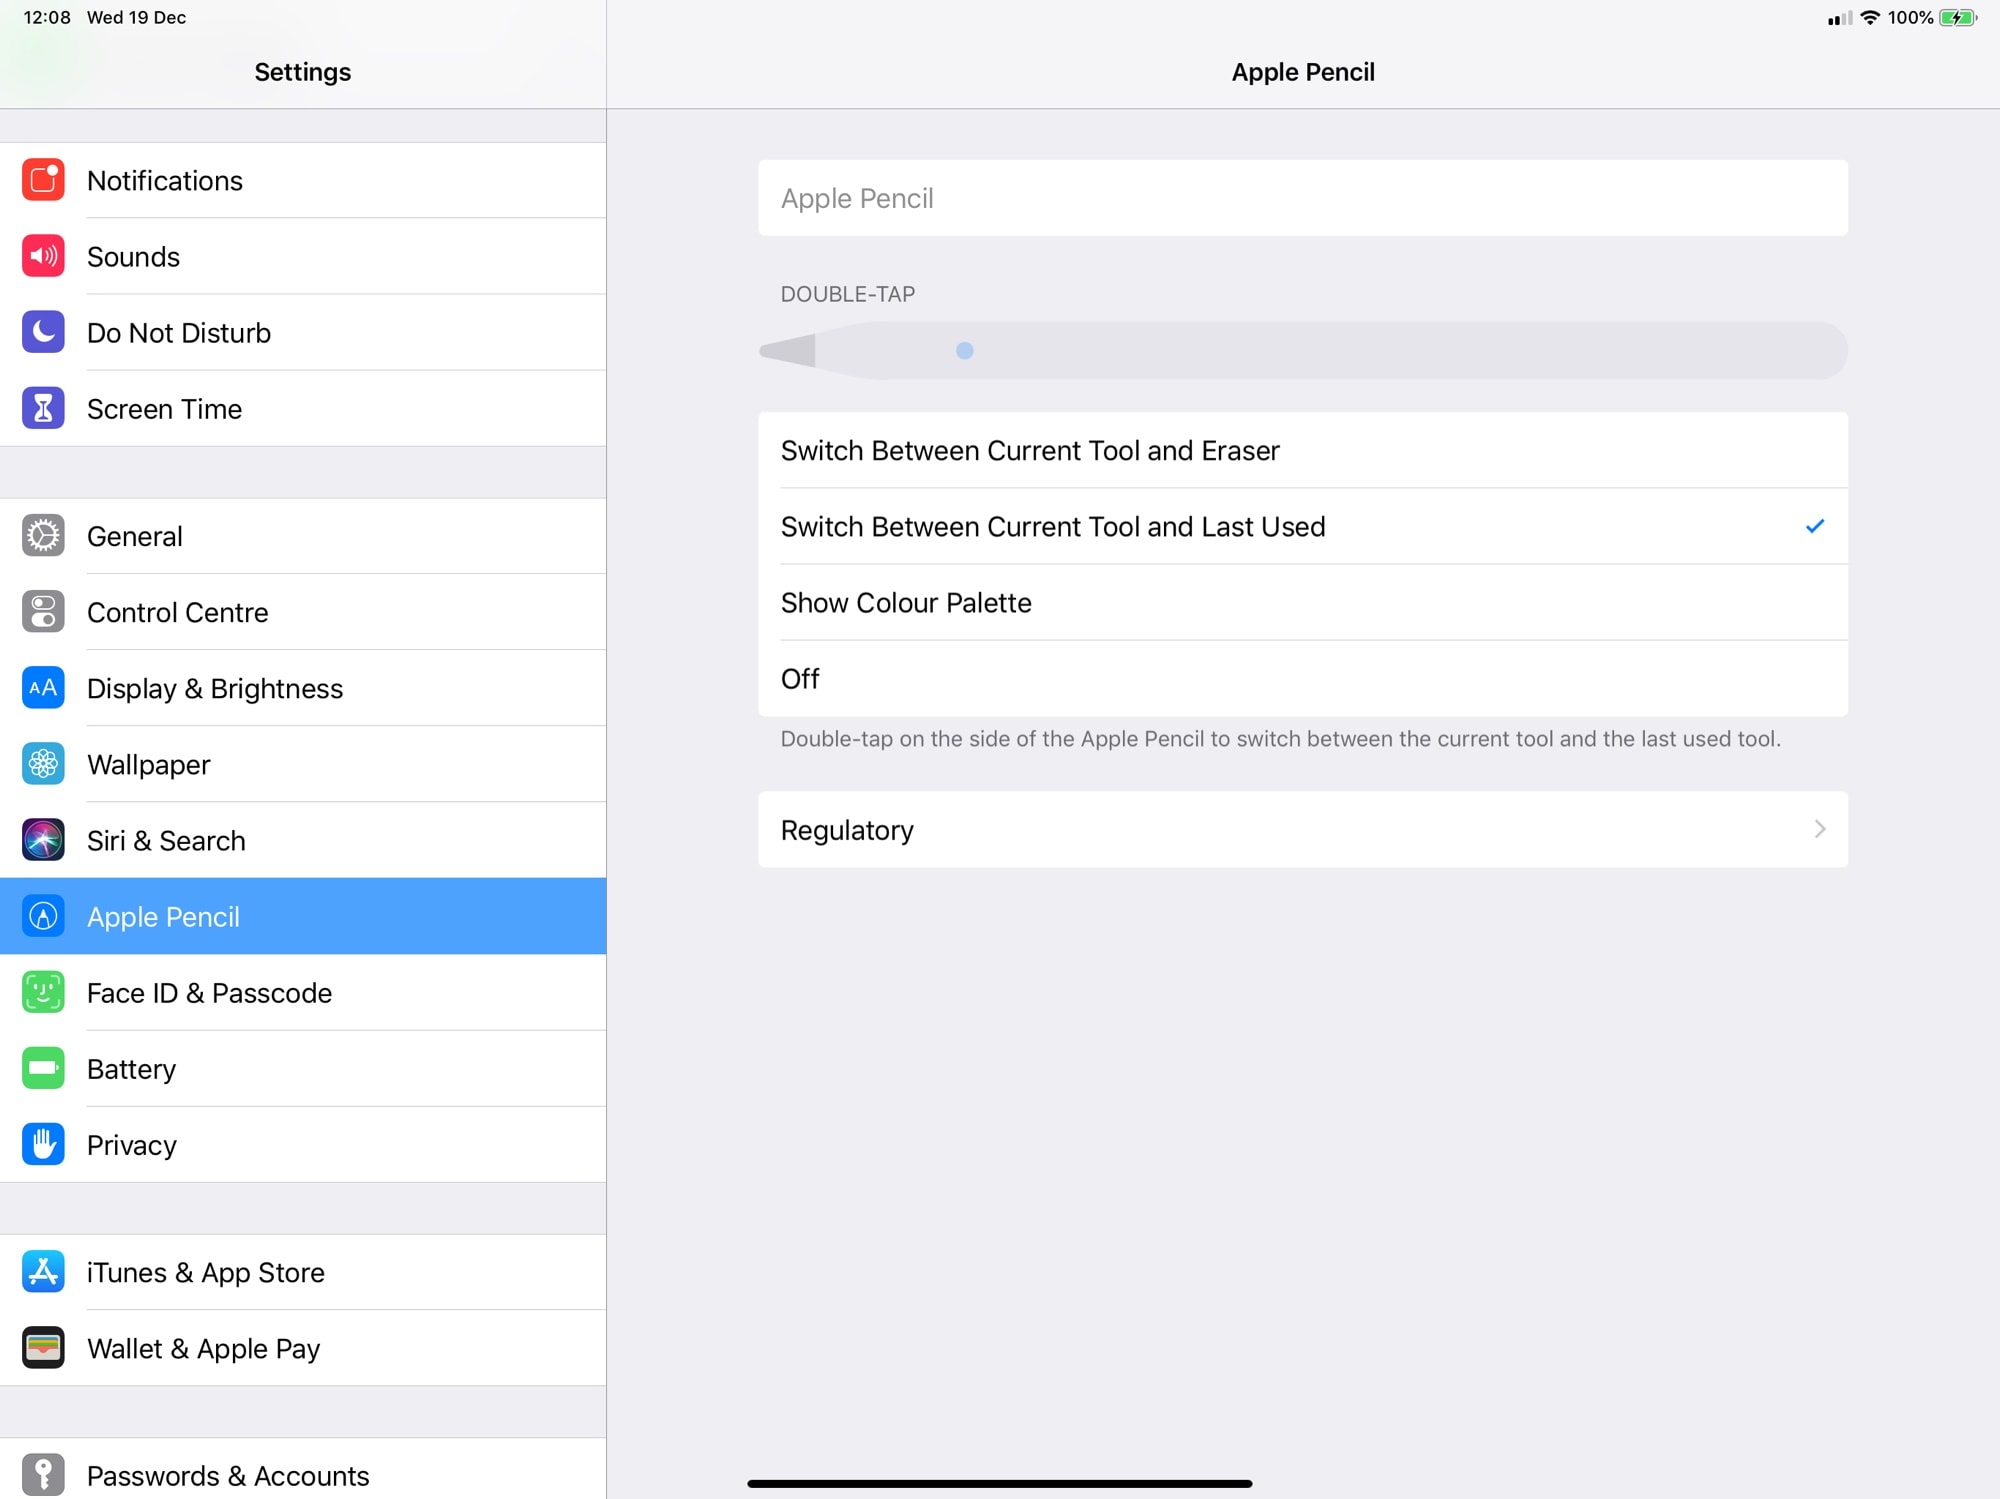 Set your Apple Pencil preferences in the new Settings panel.